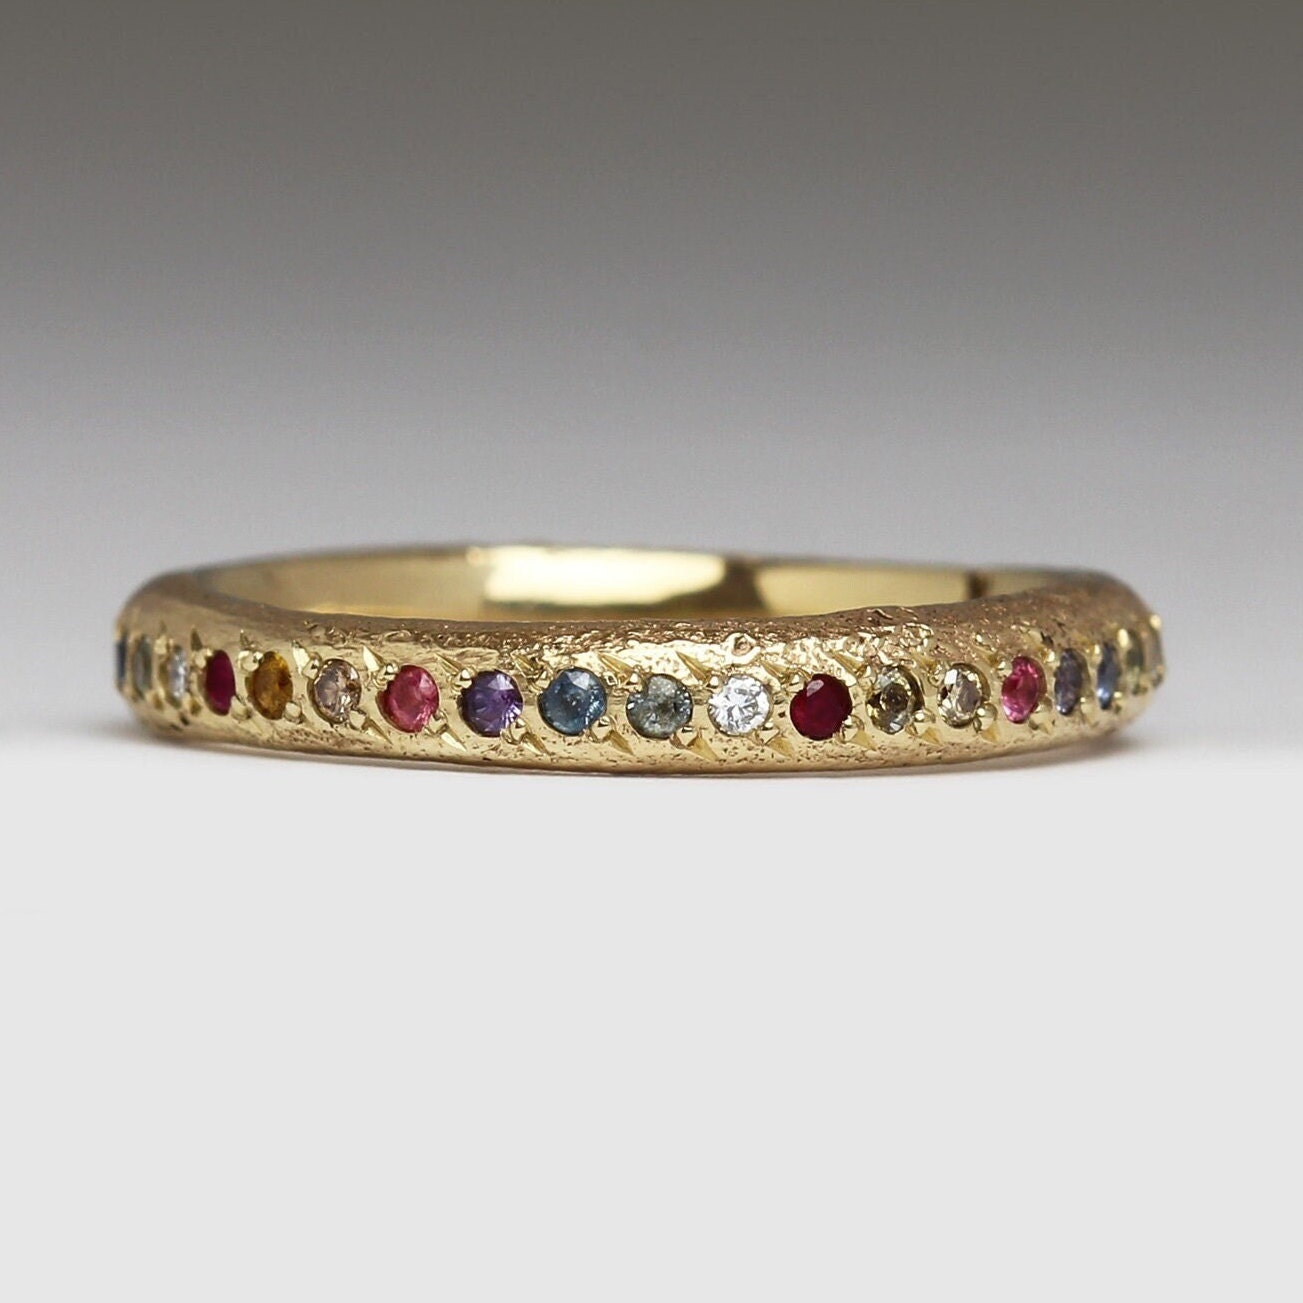 Rainbow Eternity Ring - Cast in Beach Sand Recycled 9Ct Gold Diamonds & Multi-Coloured Sapphires Handmade Cornwall